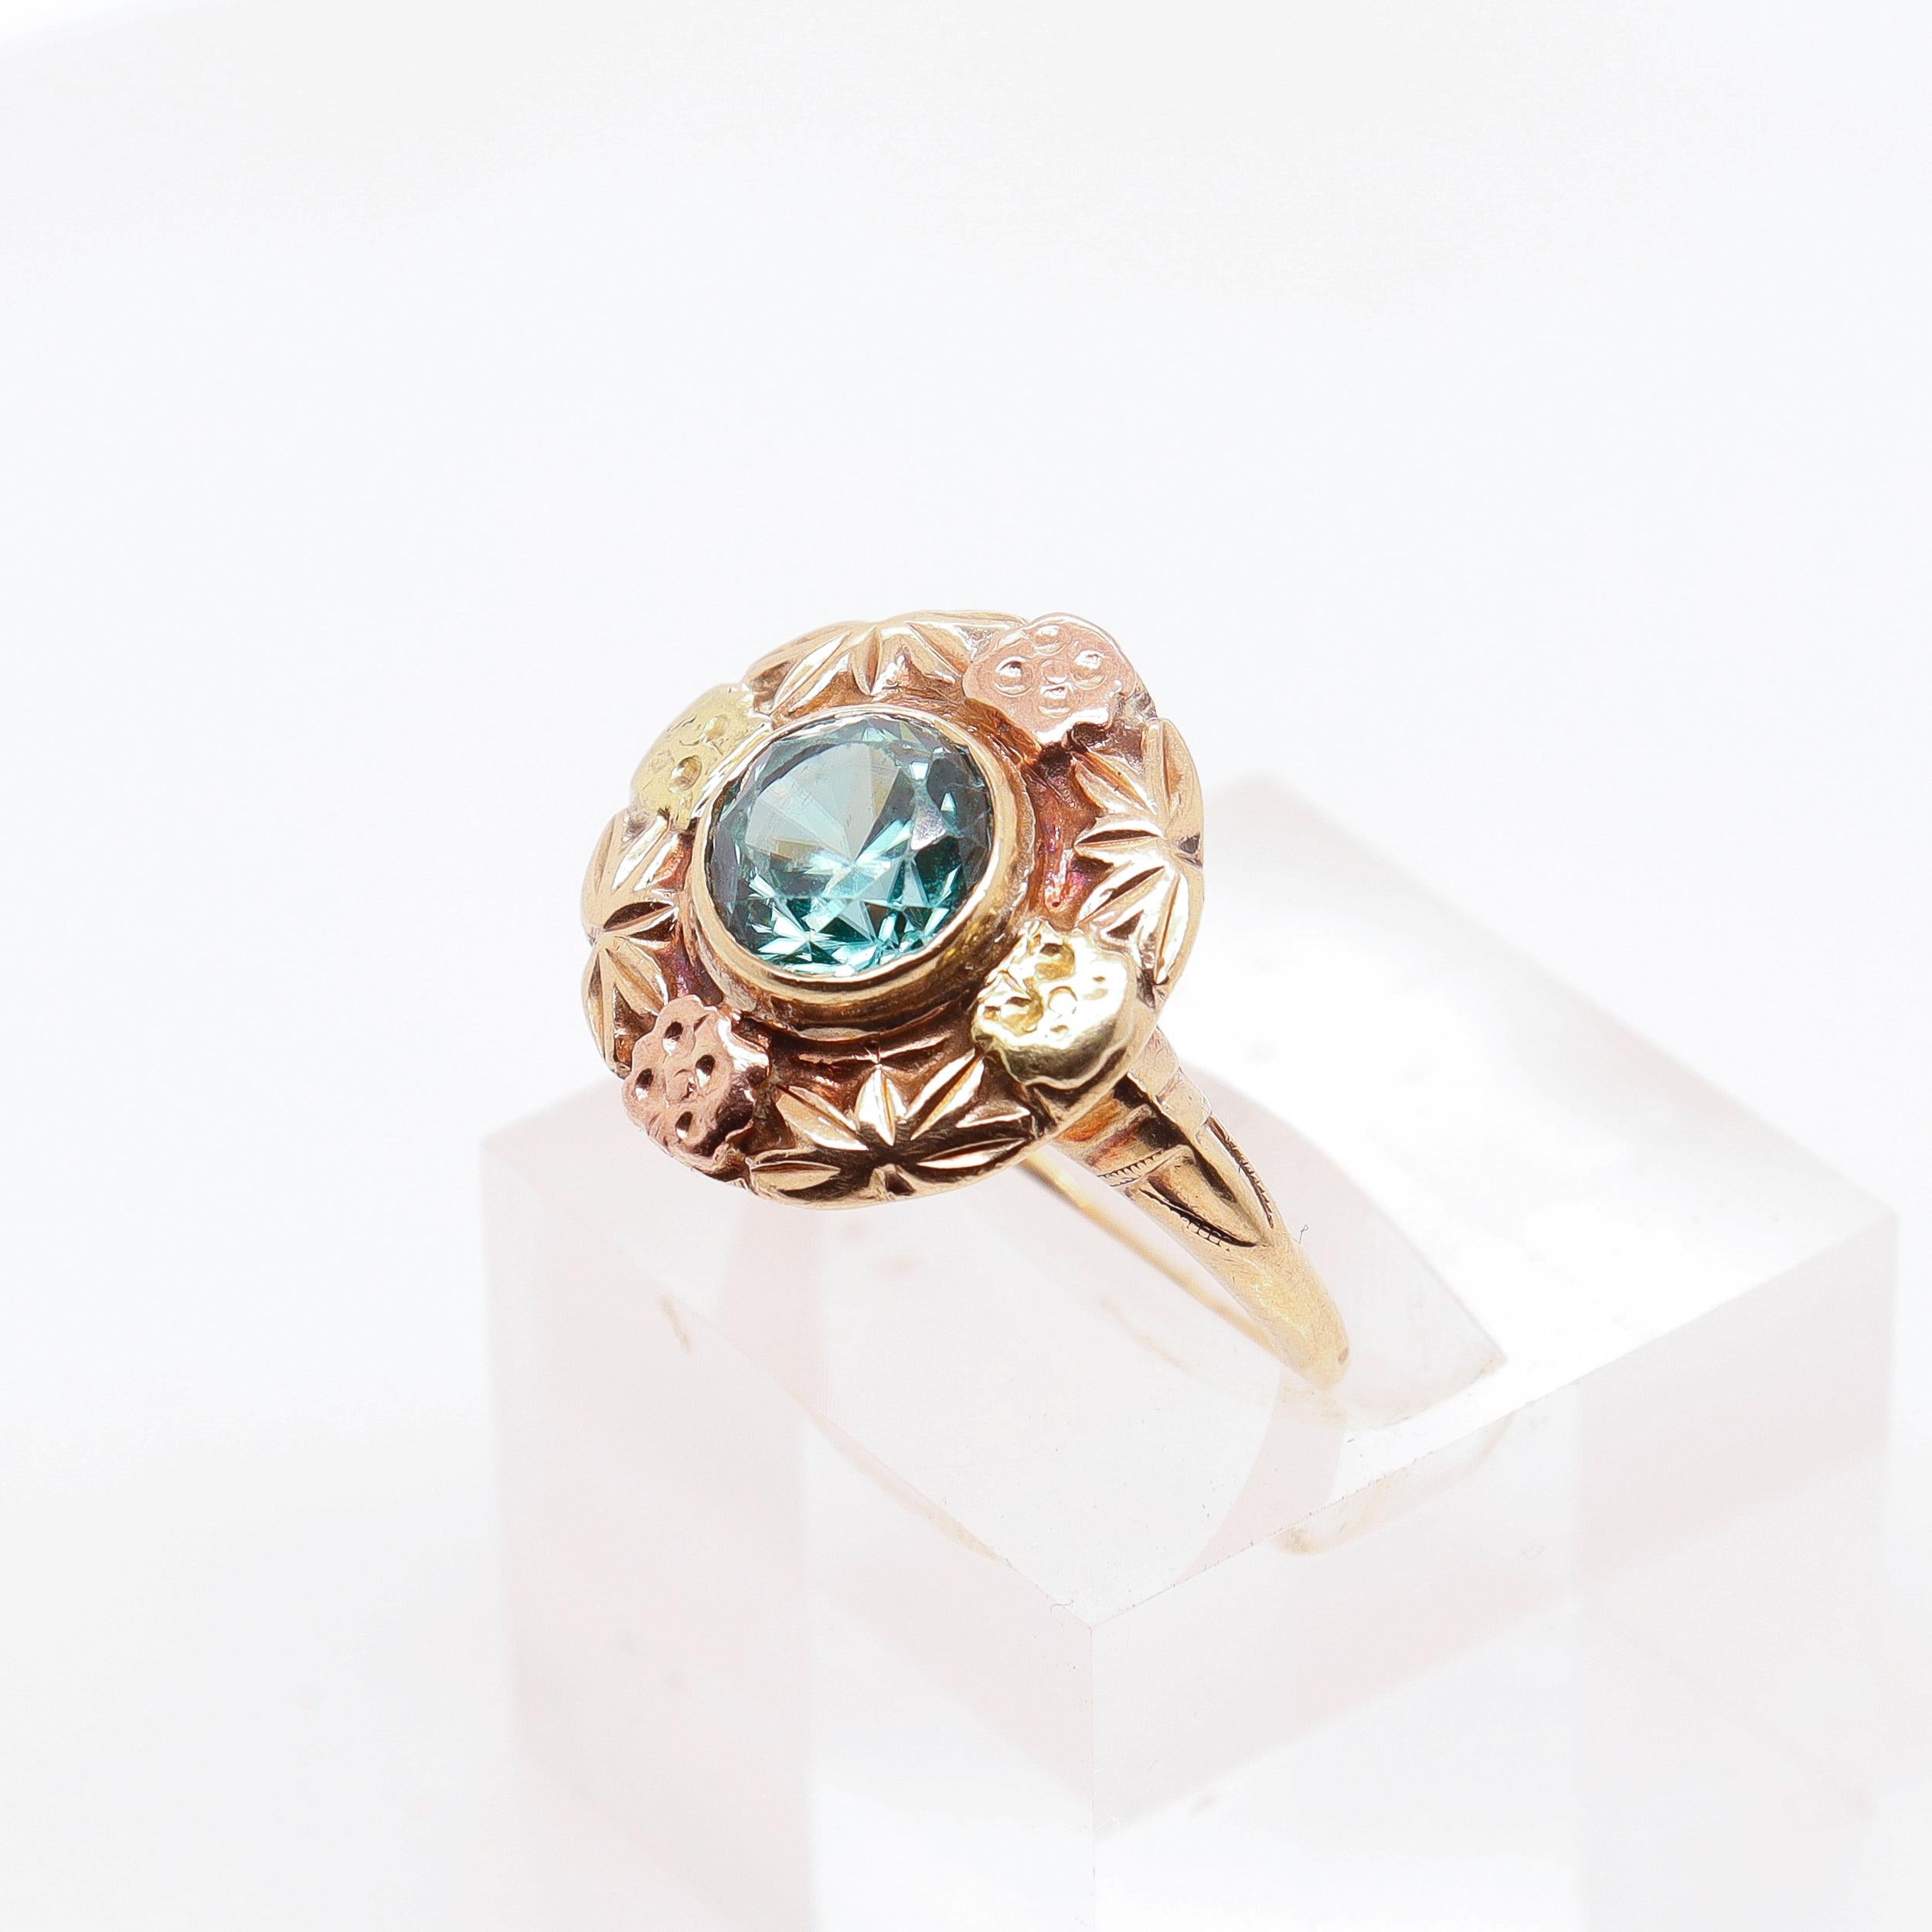 A very fine vintage gold and blue topaz ring.

In 14k yellow and rose golds.

With a large bezel blue topaz gemstone to the center.

Simply a terrific Retro ring!

Date:
20th Century

Overall Condition:
It is in overall fair, as-pictured, used